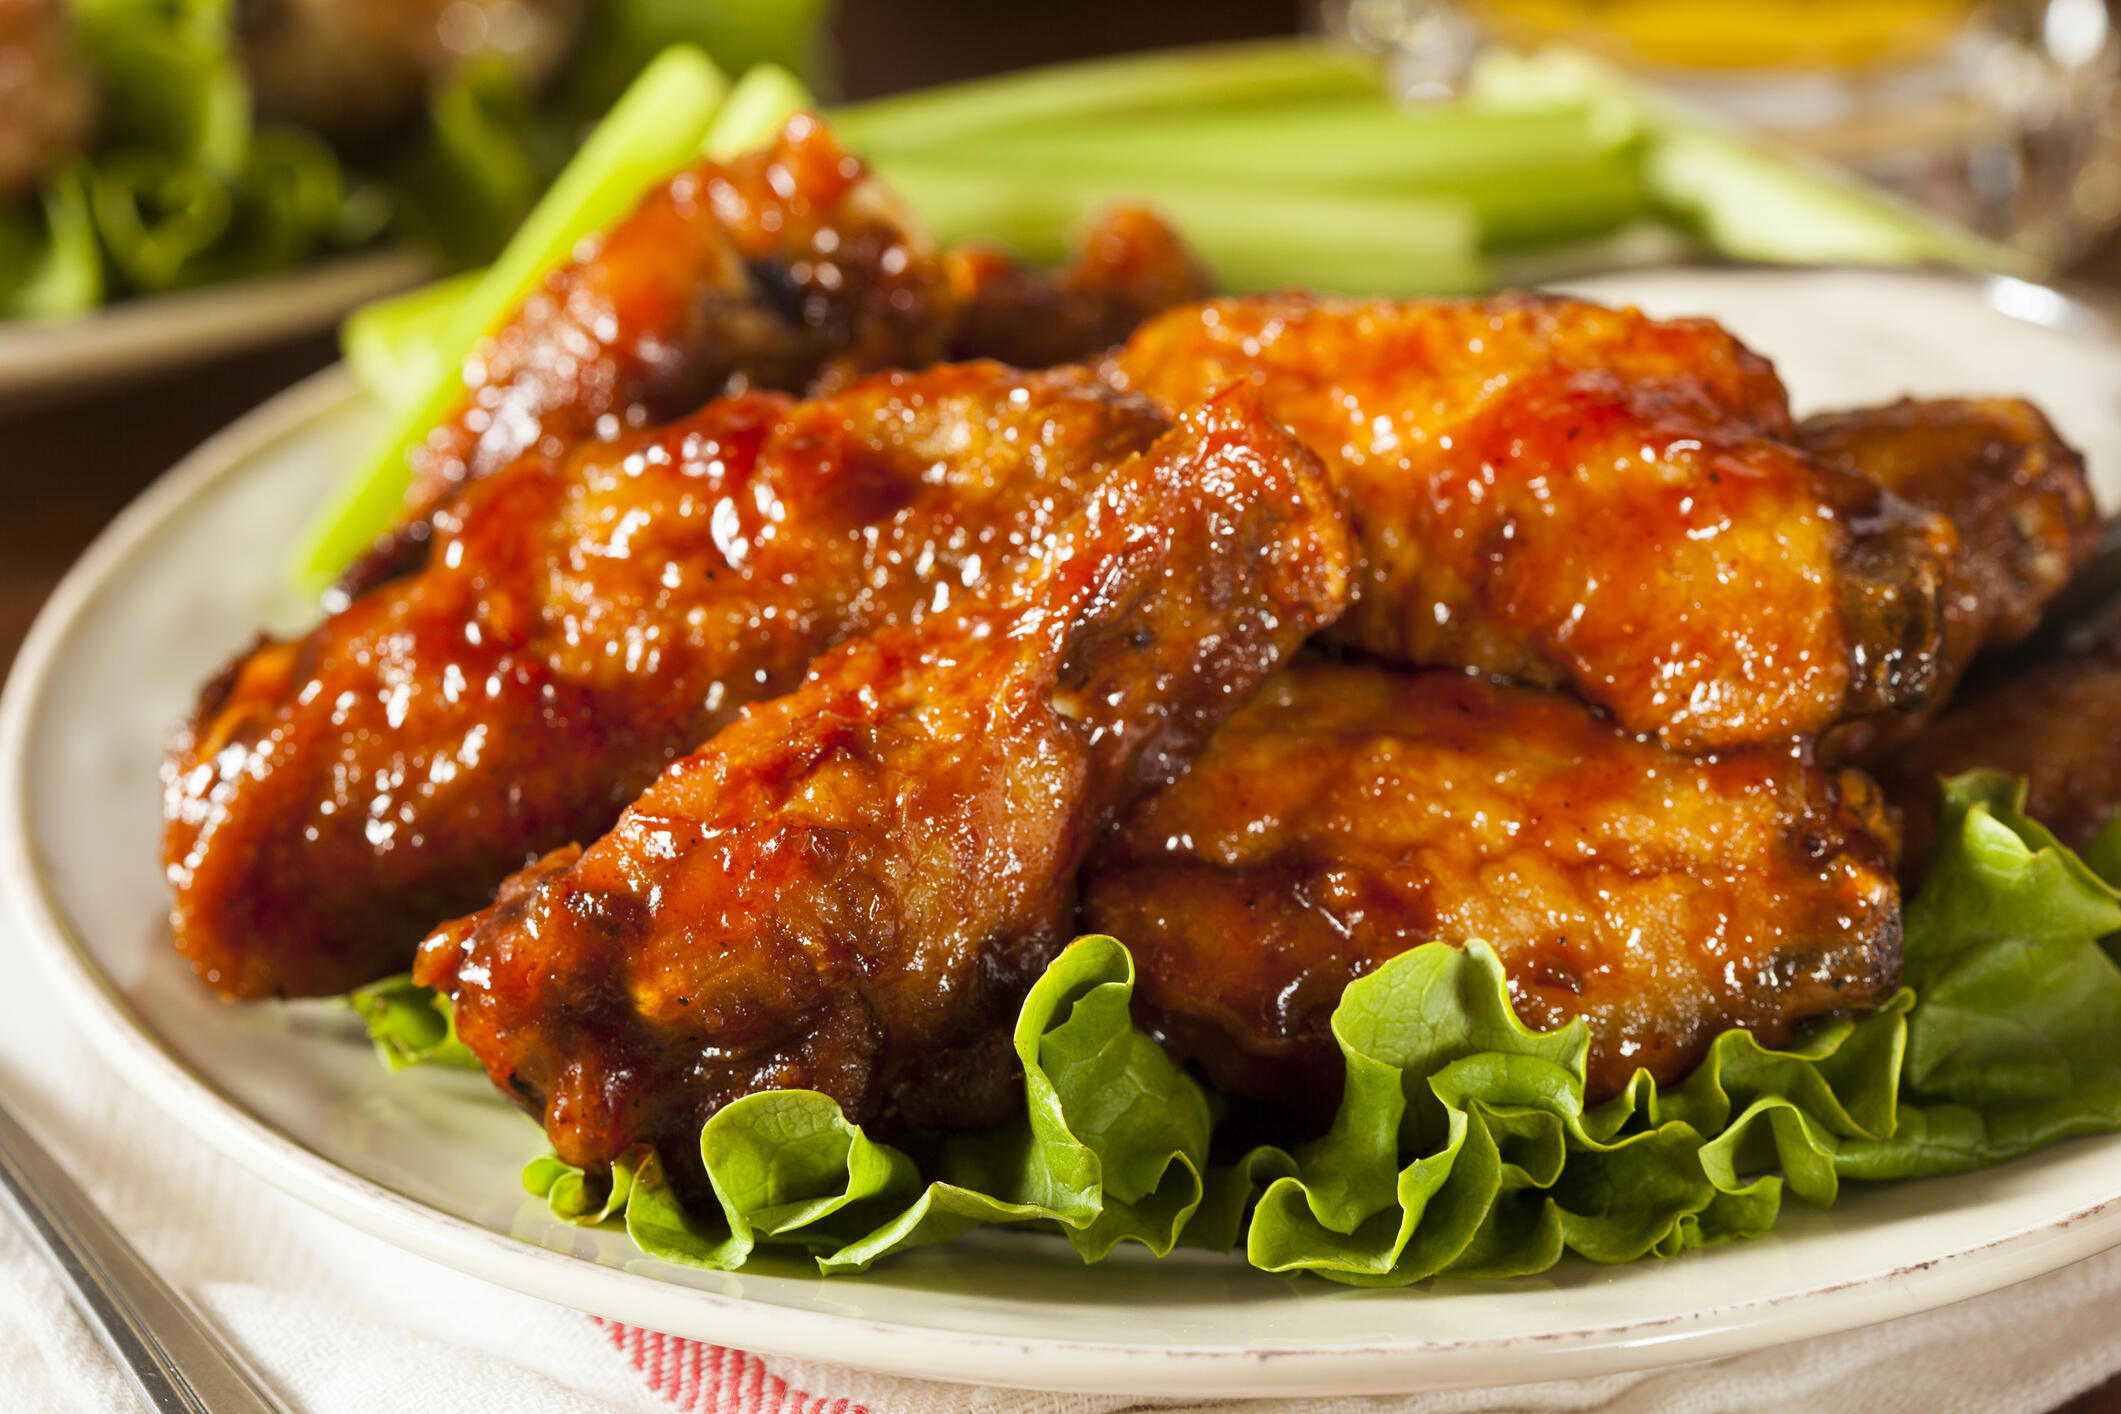 Pennsylvania Restaurant Serves The Best Chicken Wings In The Entire State